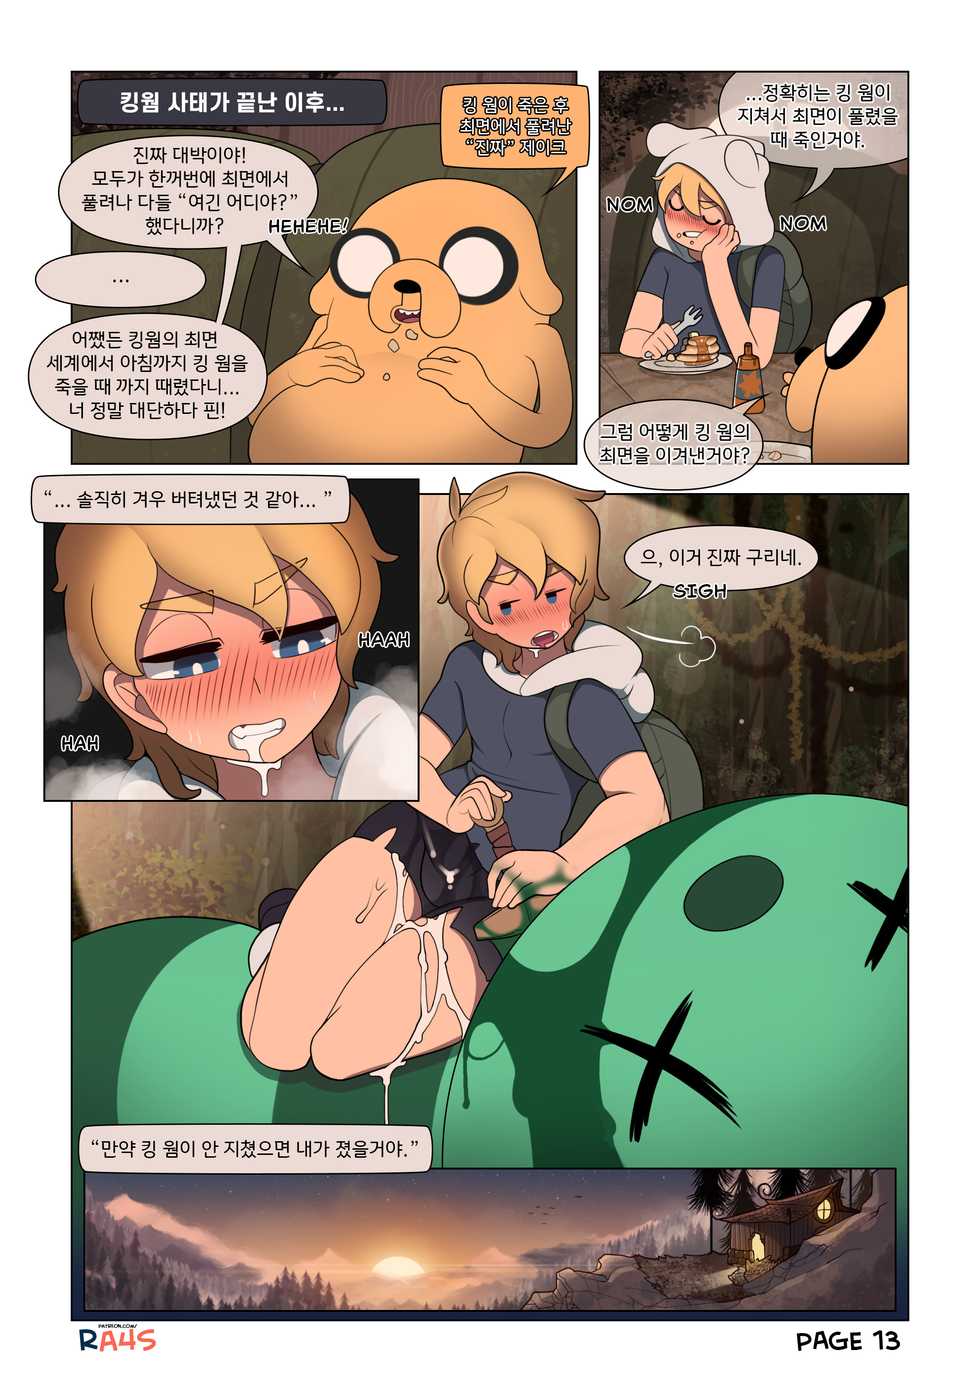 [Ra4s] The King Worm (Adventure Time) [Korean] - Page 16